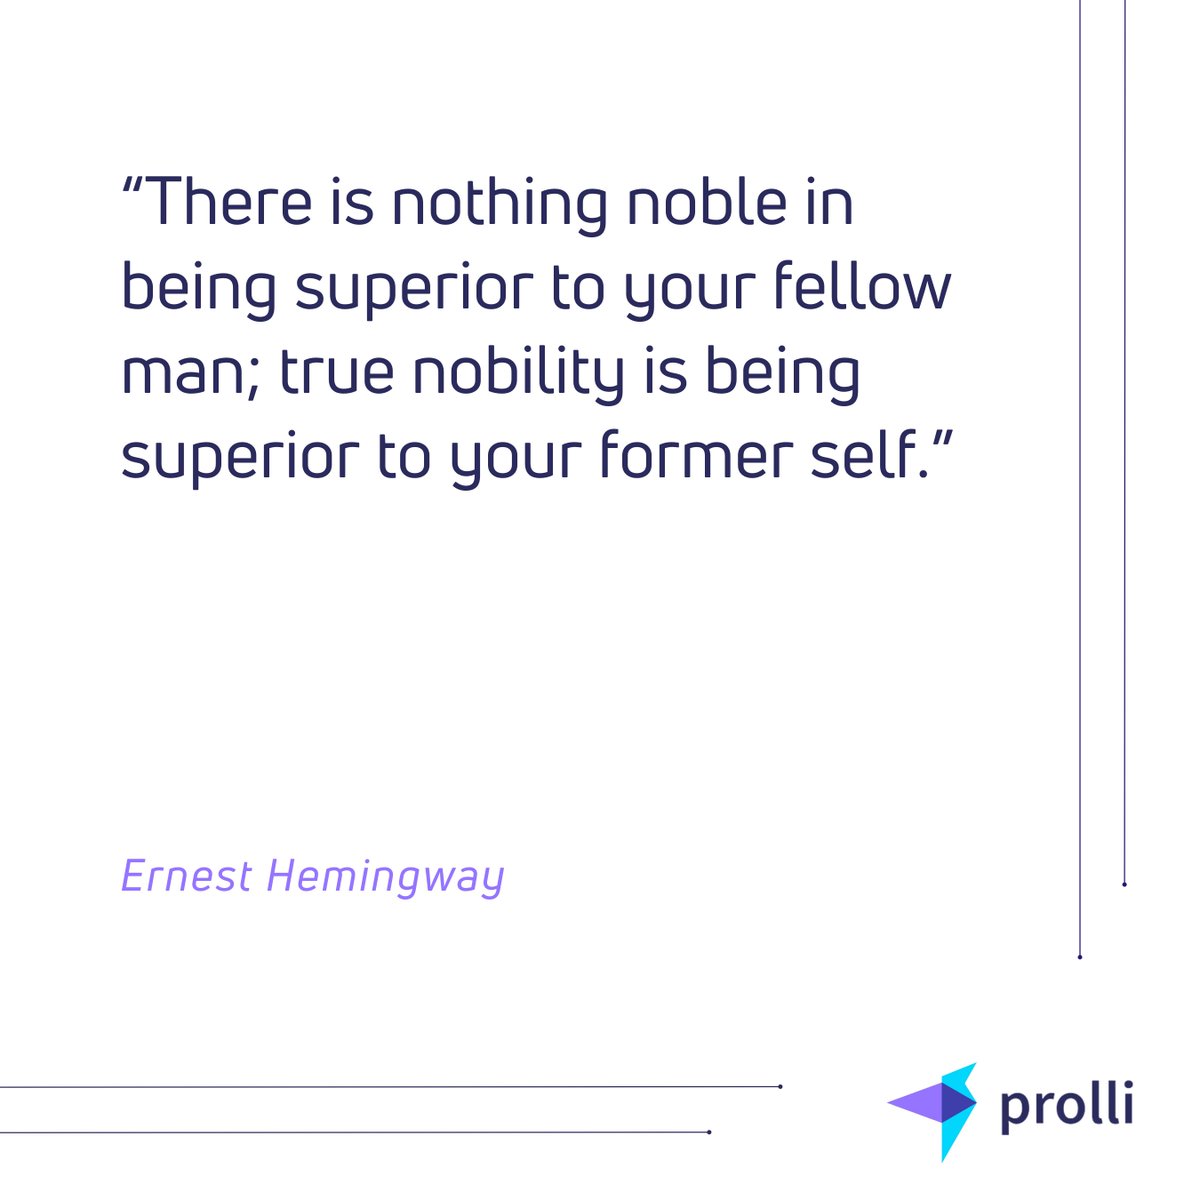 Don't miss out on valuable insights and updates – Follow @prolliapp ❤️ and be part of the journey as we approach our store launch!!

#QuoteOfTheDay #InspirationalQuotes #MotivationalQuotes #LifeQuotes #PositiveQuotes #WordsOfWisdom #DailyQuotes #prolli #prolliapp #ernesthemingway